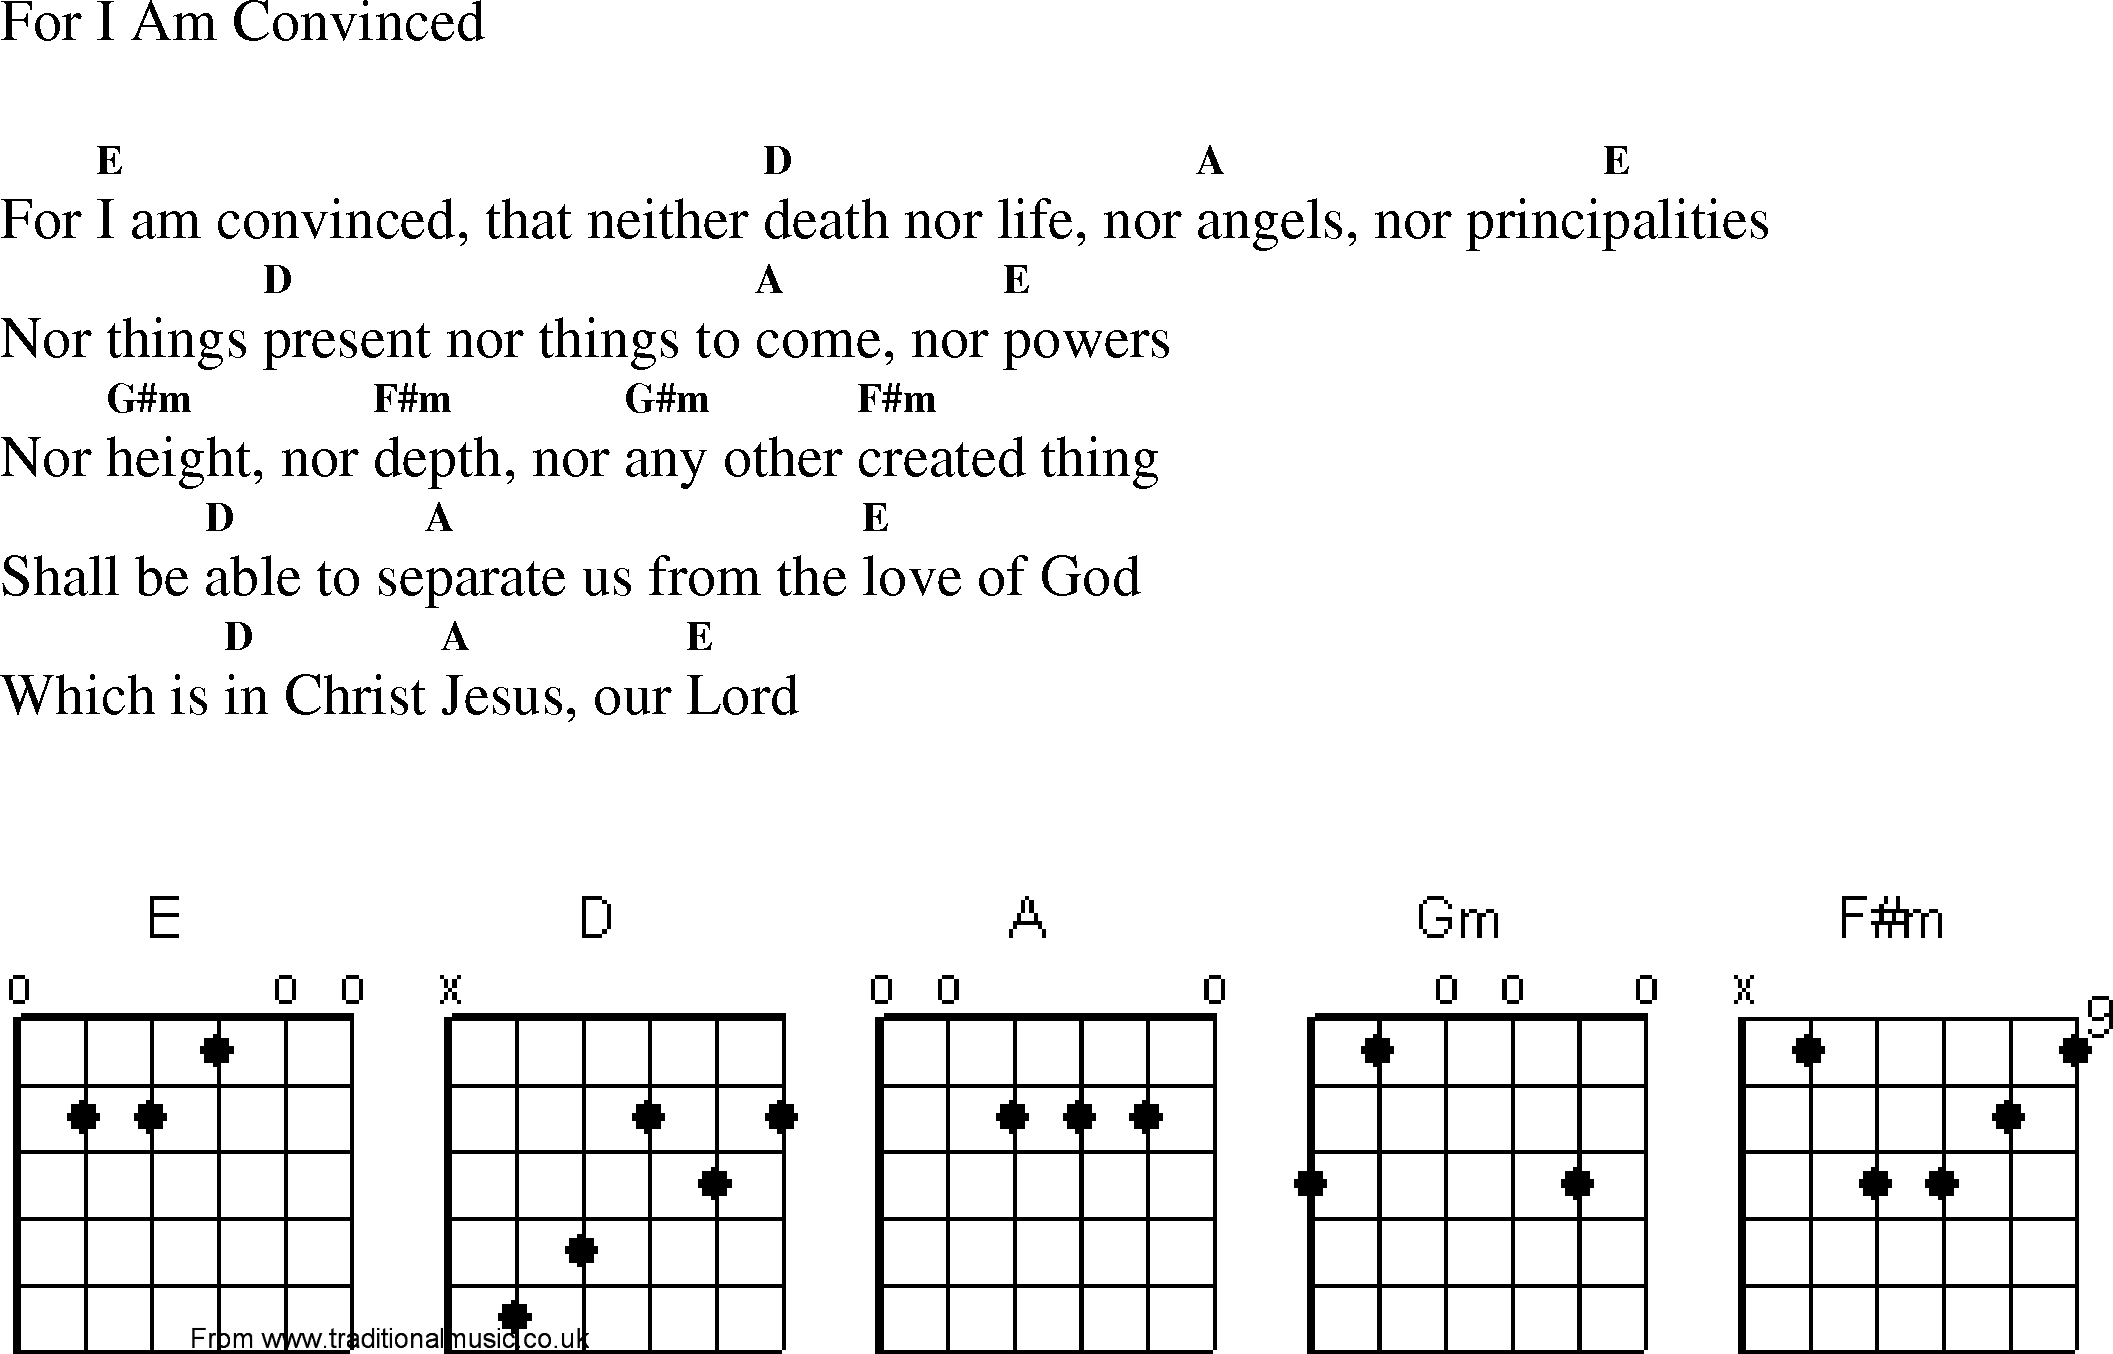 Gospel Song: for_i_am_convinced, lyrics and chords.